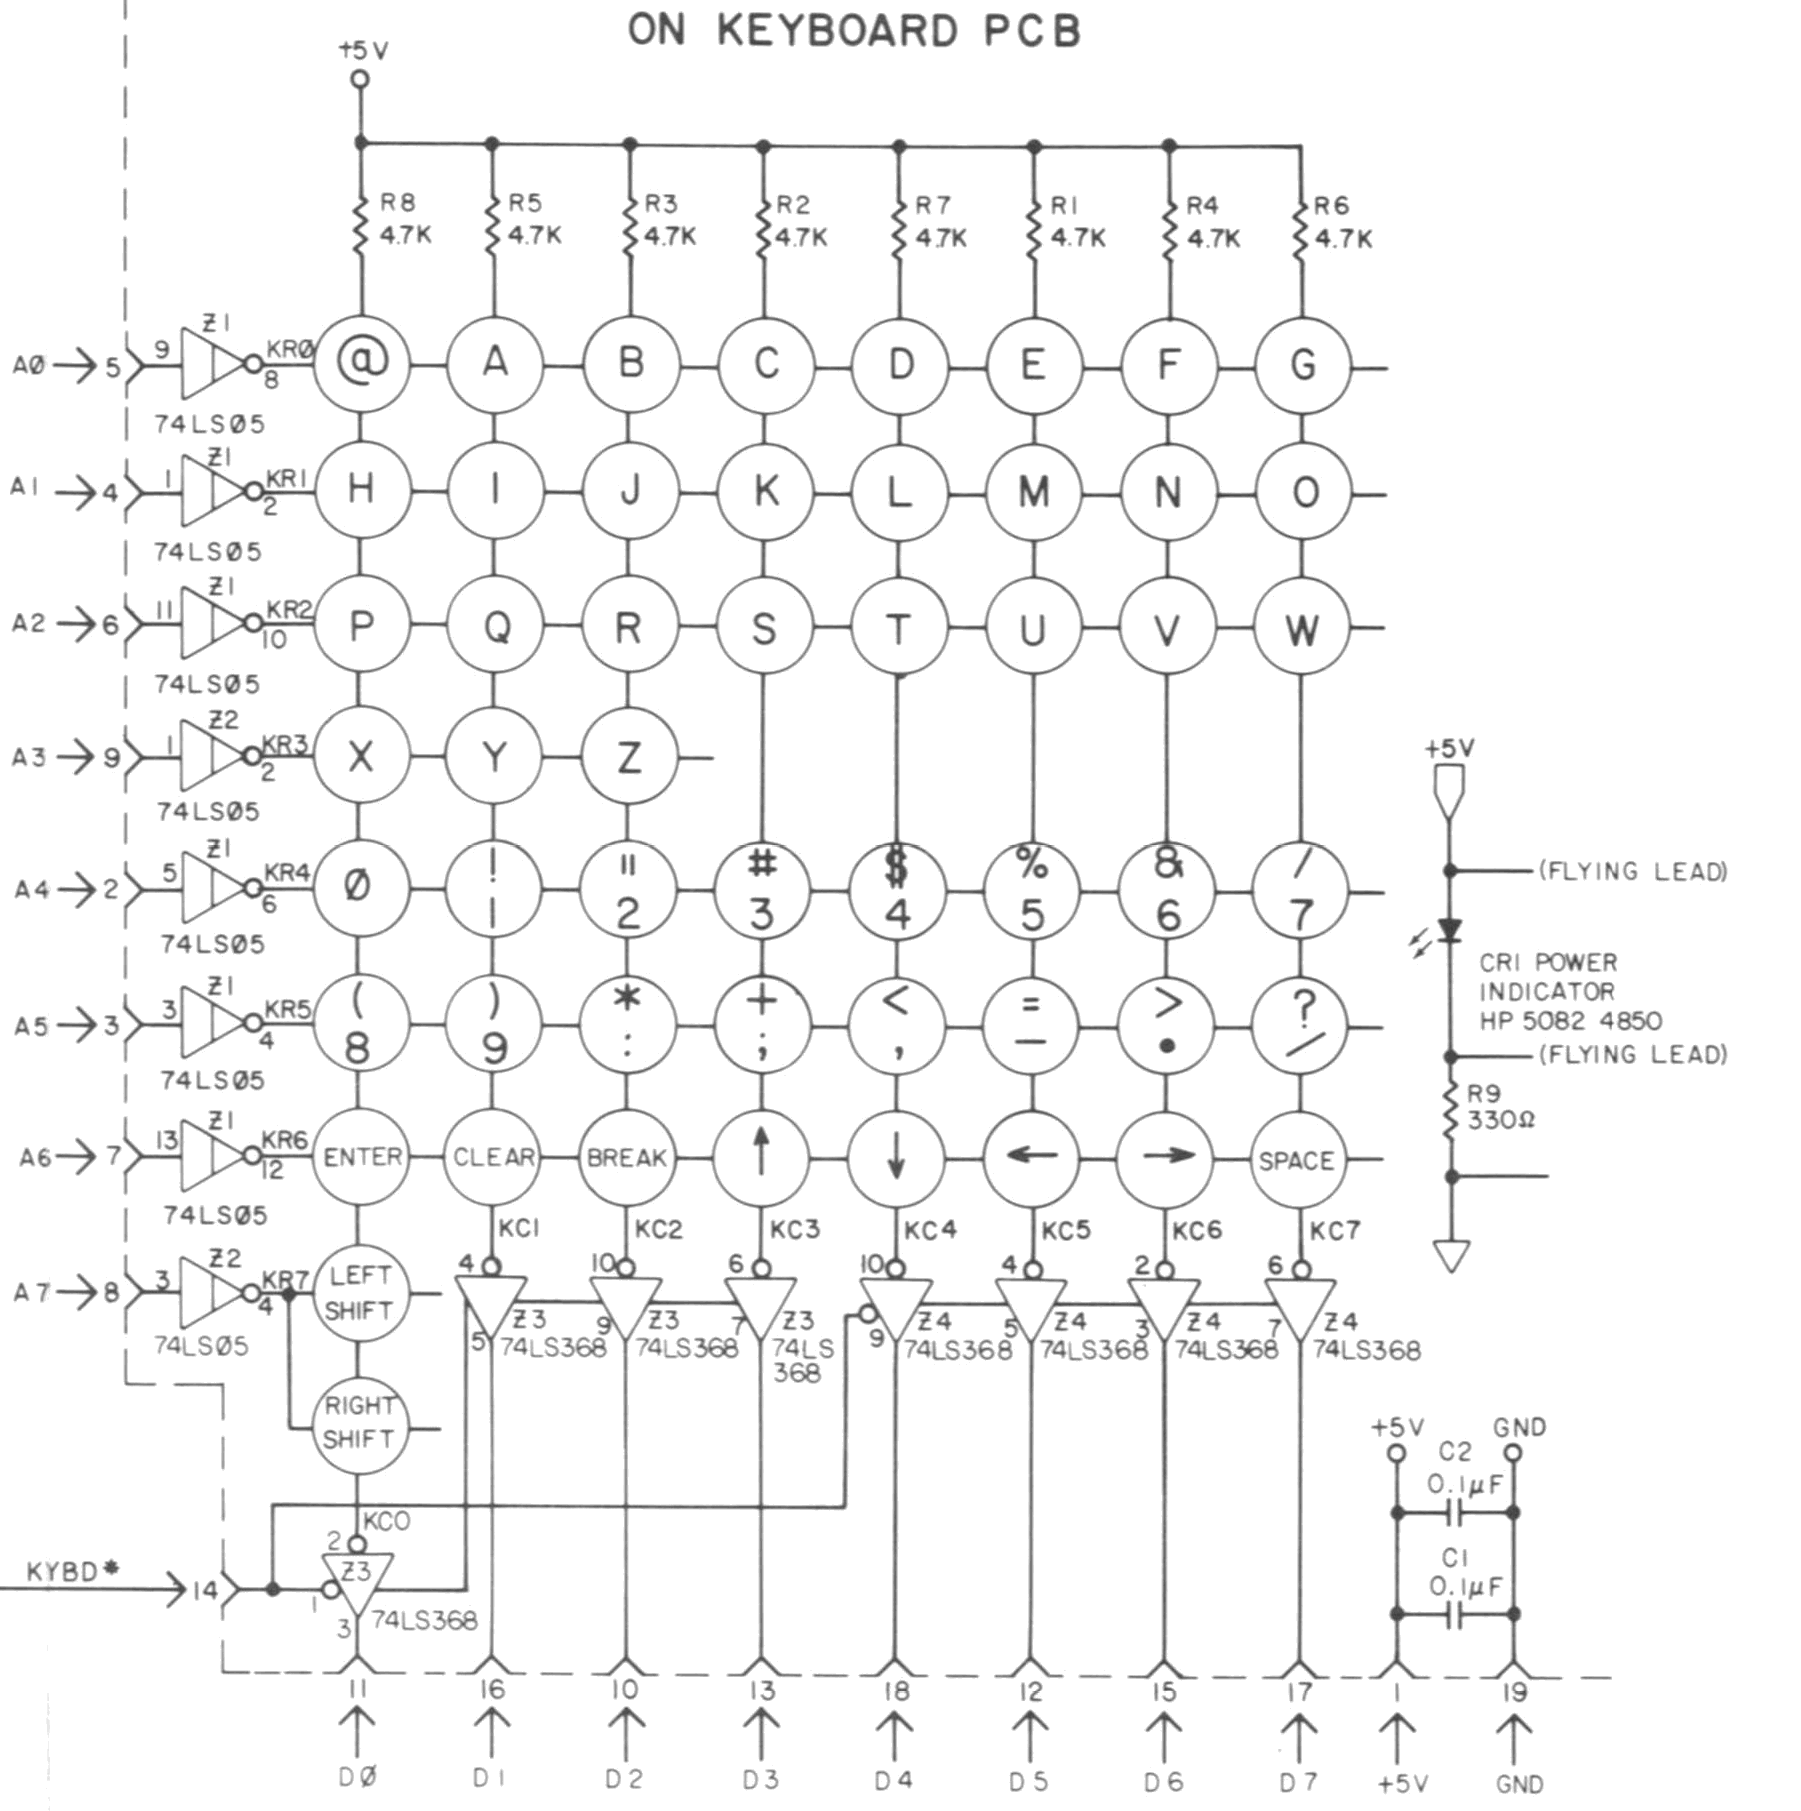 TRS-80-schematic.png